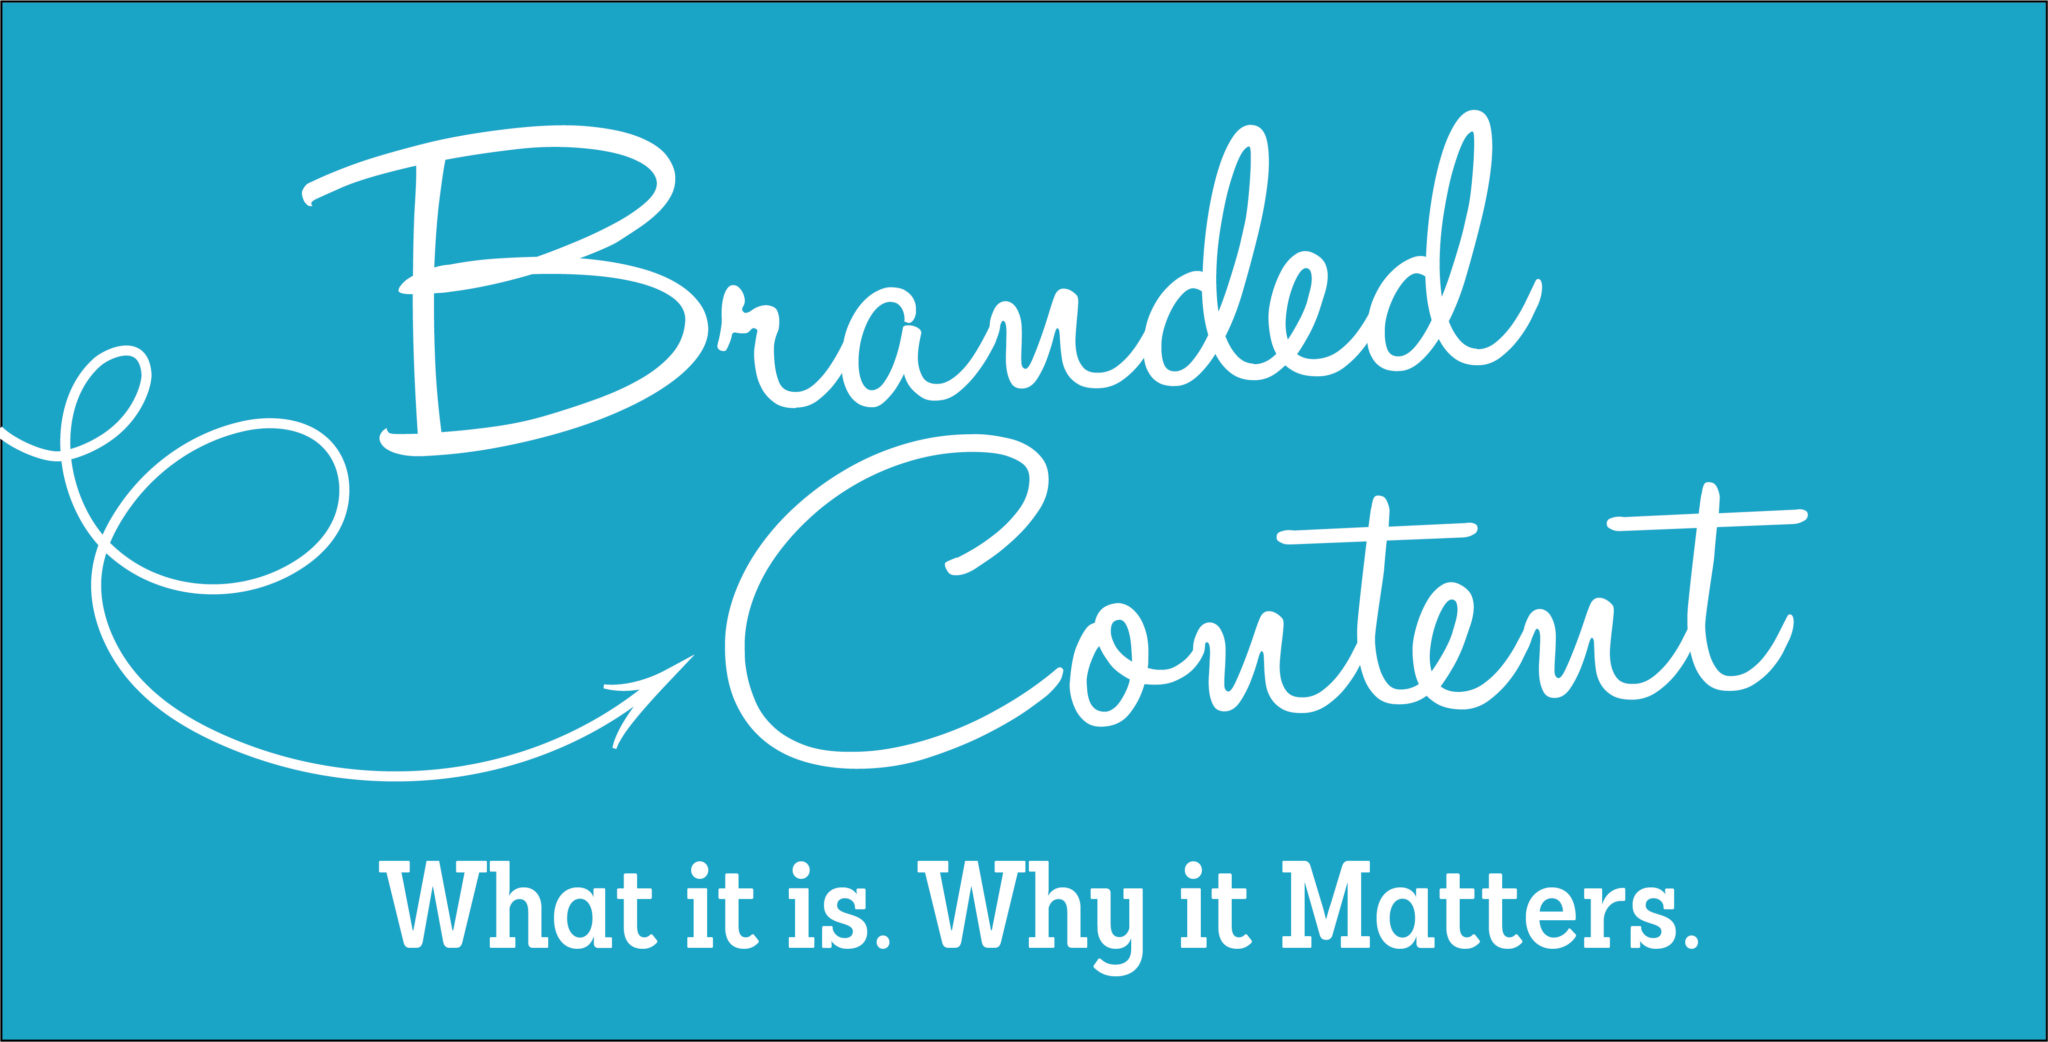 What is Branded Content and Why It Matters? The DVI Group